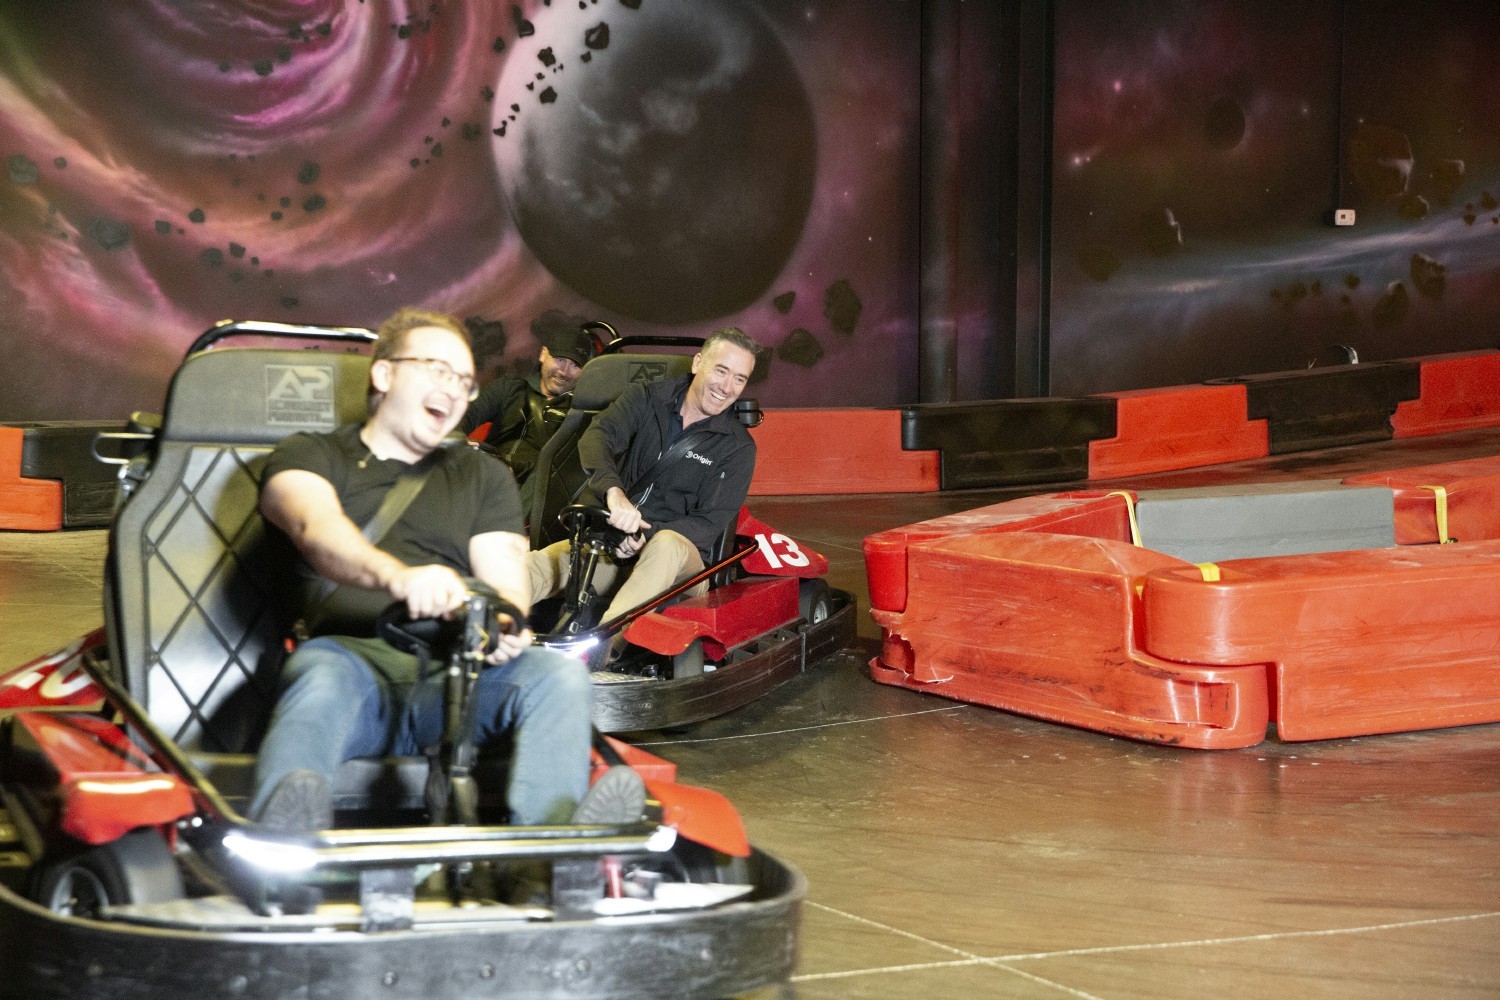 Go Kart races during a day of fun with the whole Origin-USA team.